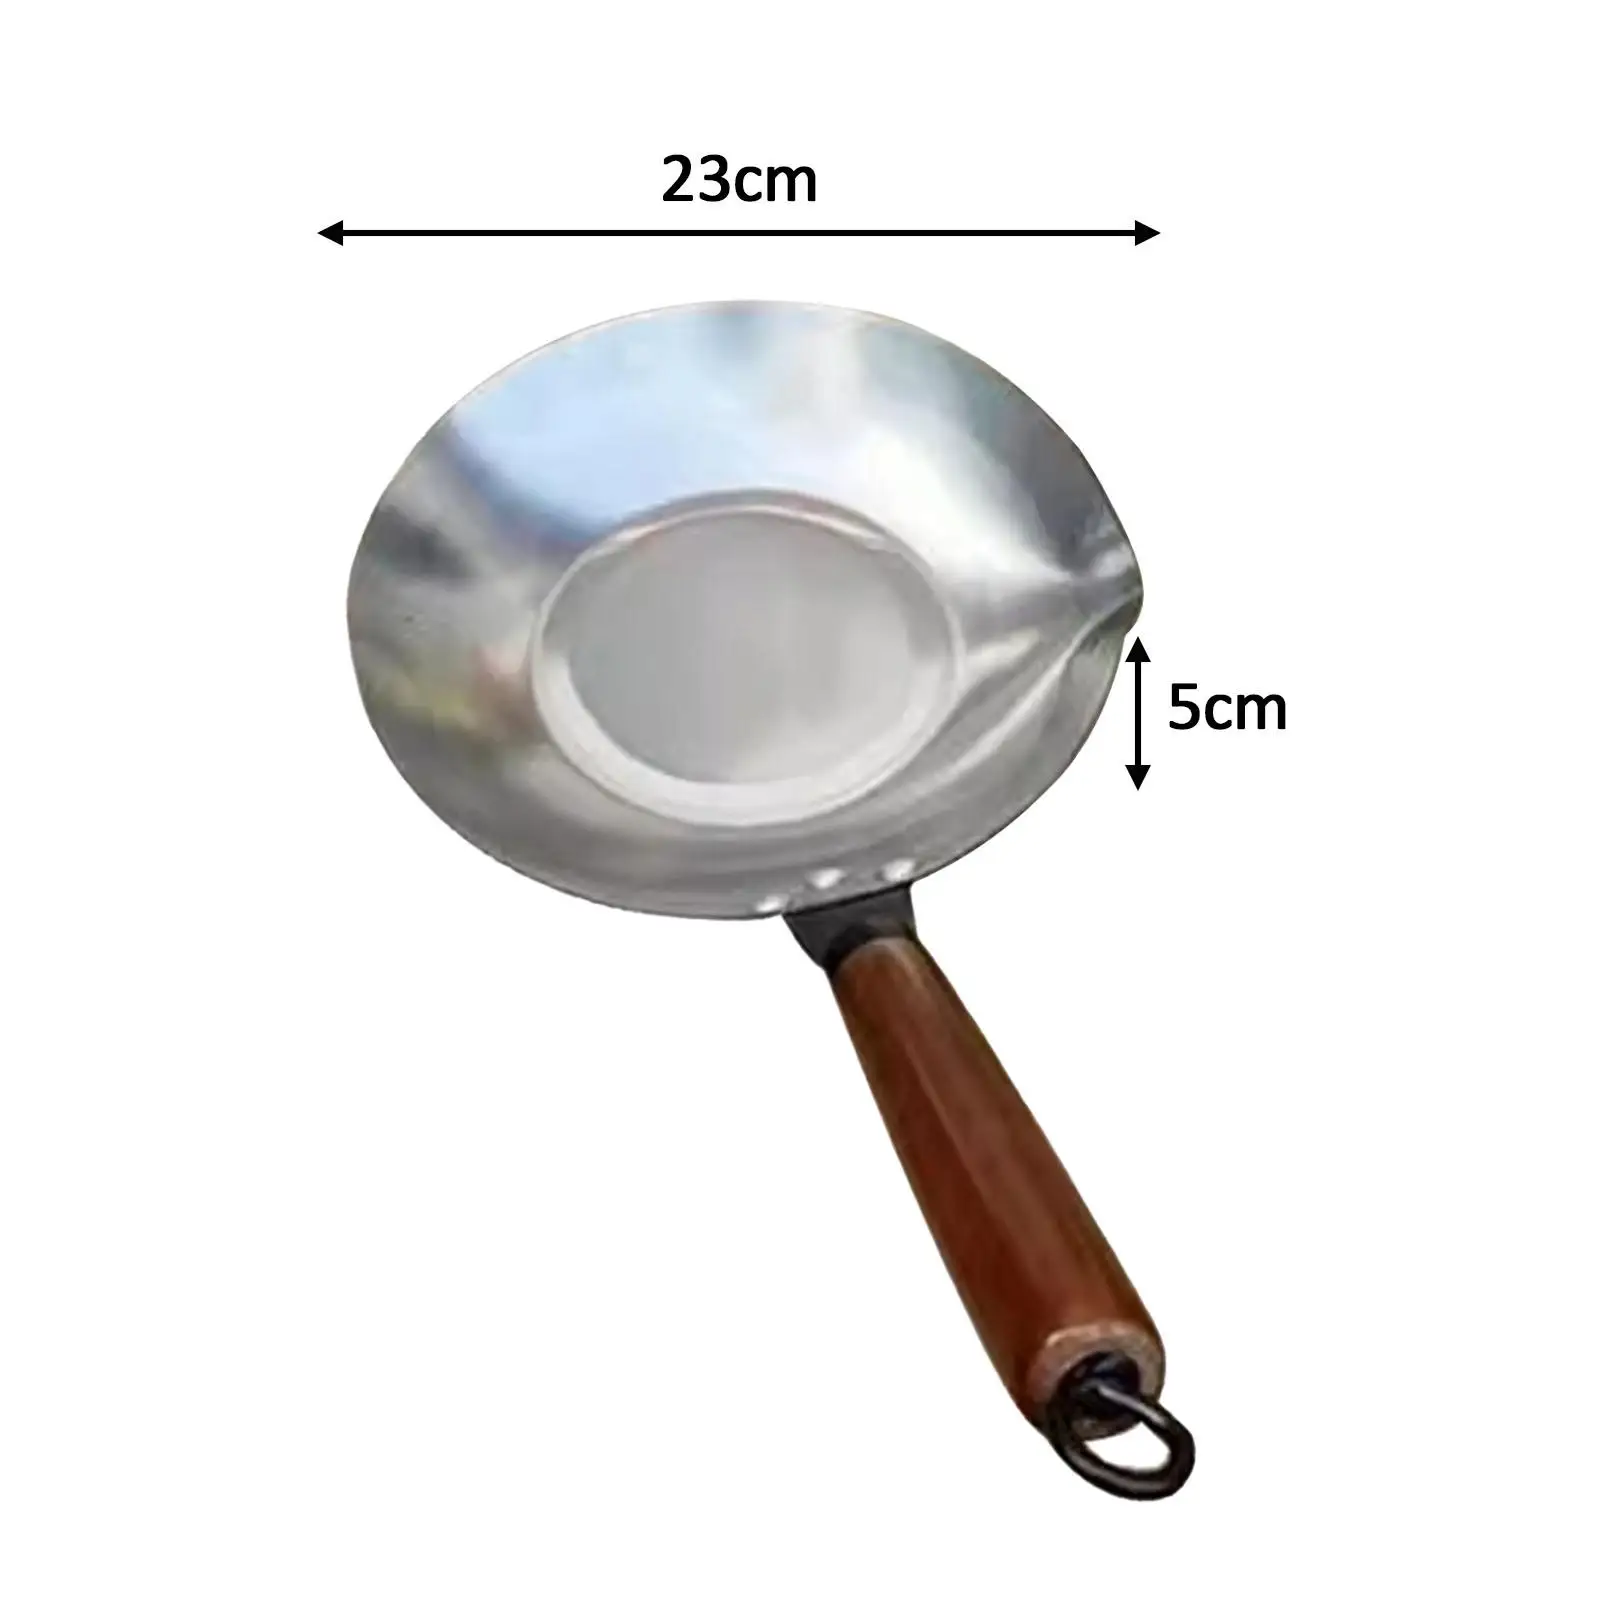 Sugar Pan Portable Wok Gas Induction Cooker Wooden Handle Melting Pan for Chocolate Snacks Tanghulu Making Candied Haws Cooking